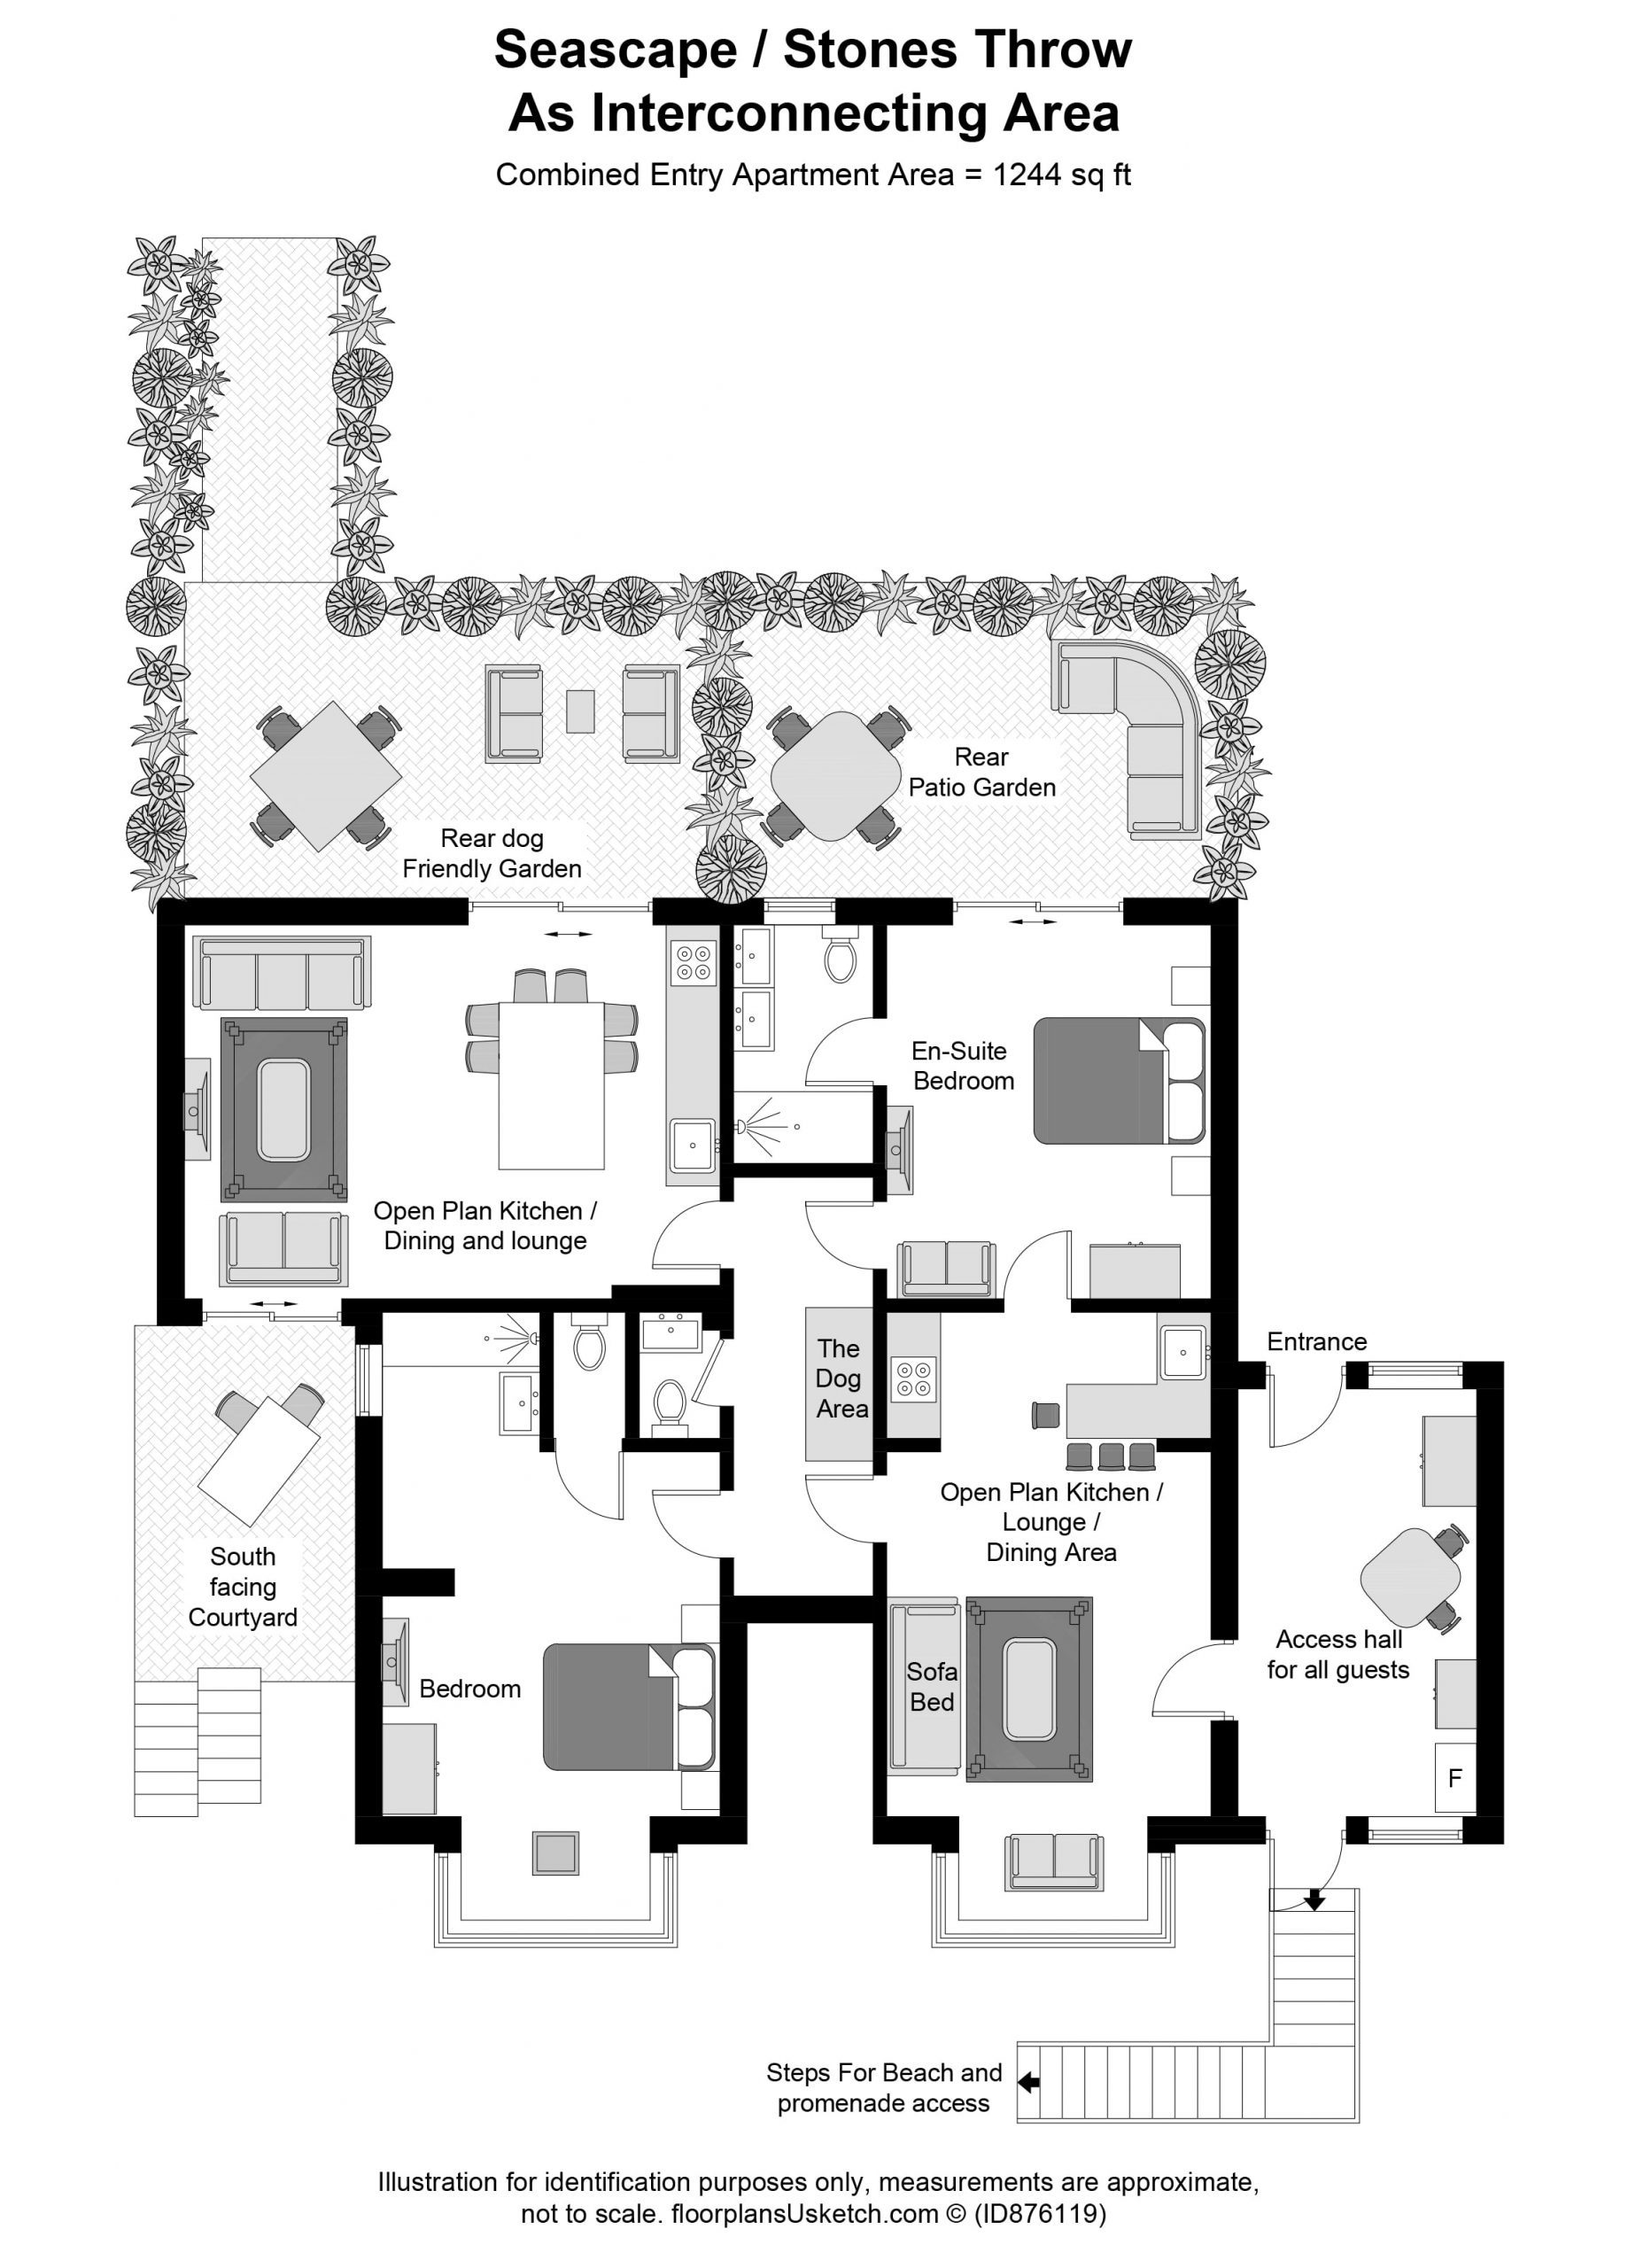 Floorplan Seascape / Stones Throw Luxury Apartment Kent. Places to stay in Hythe